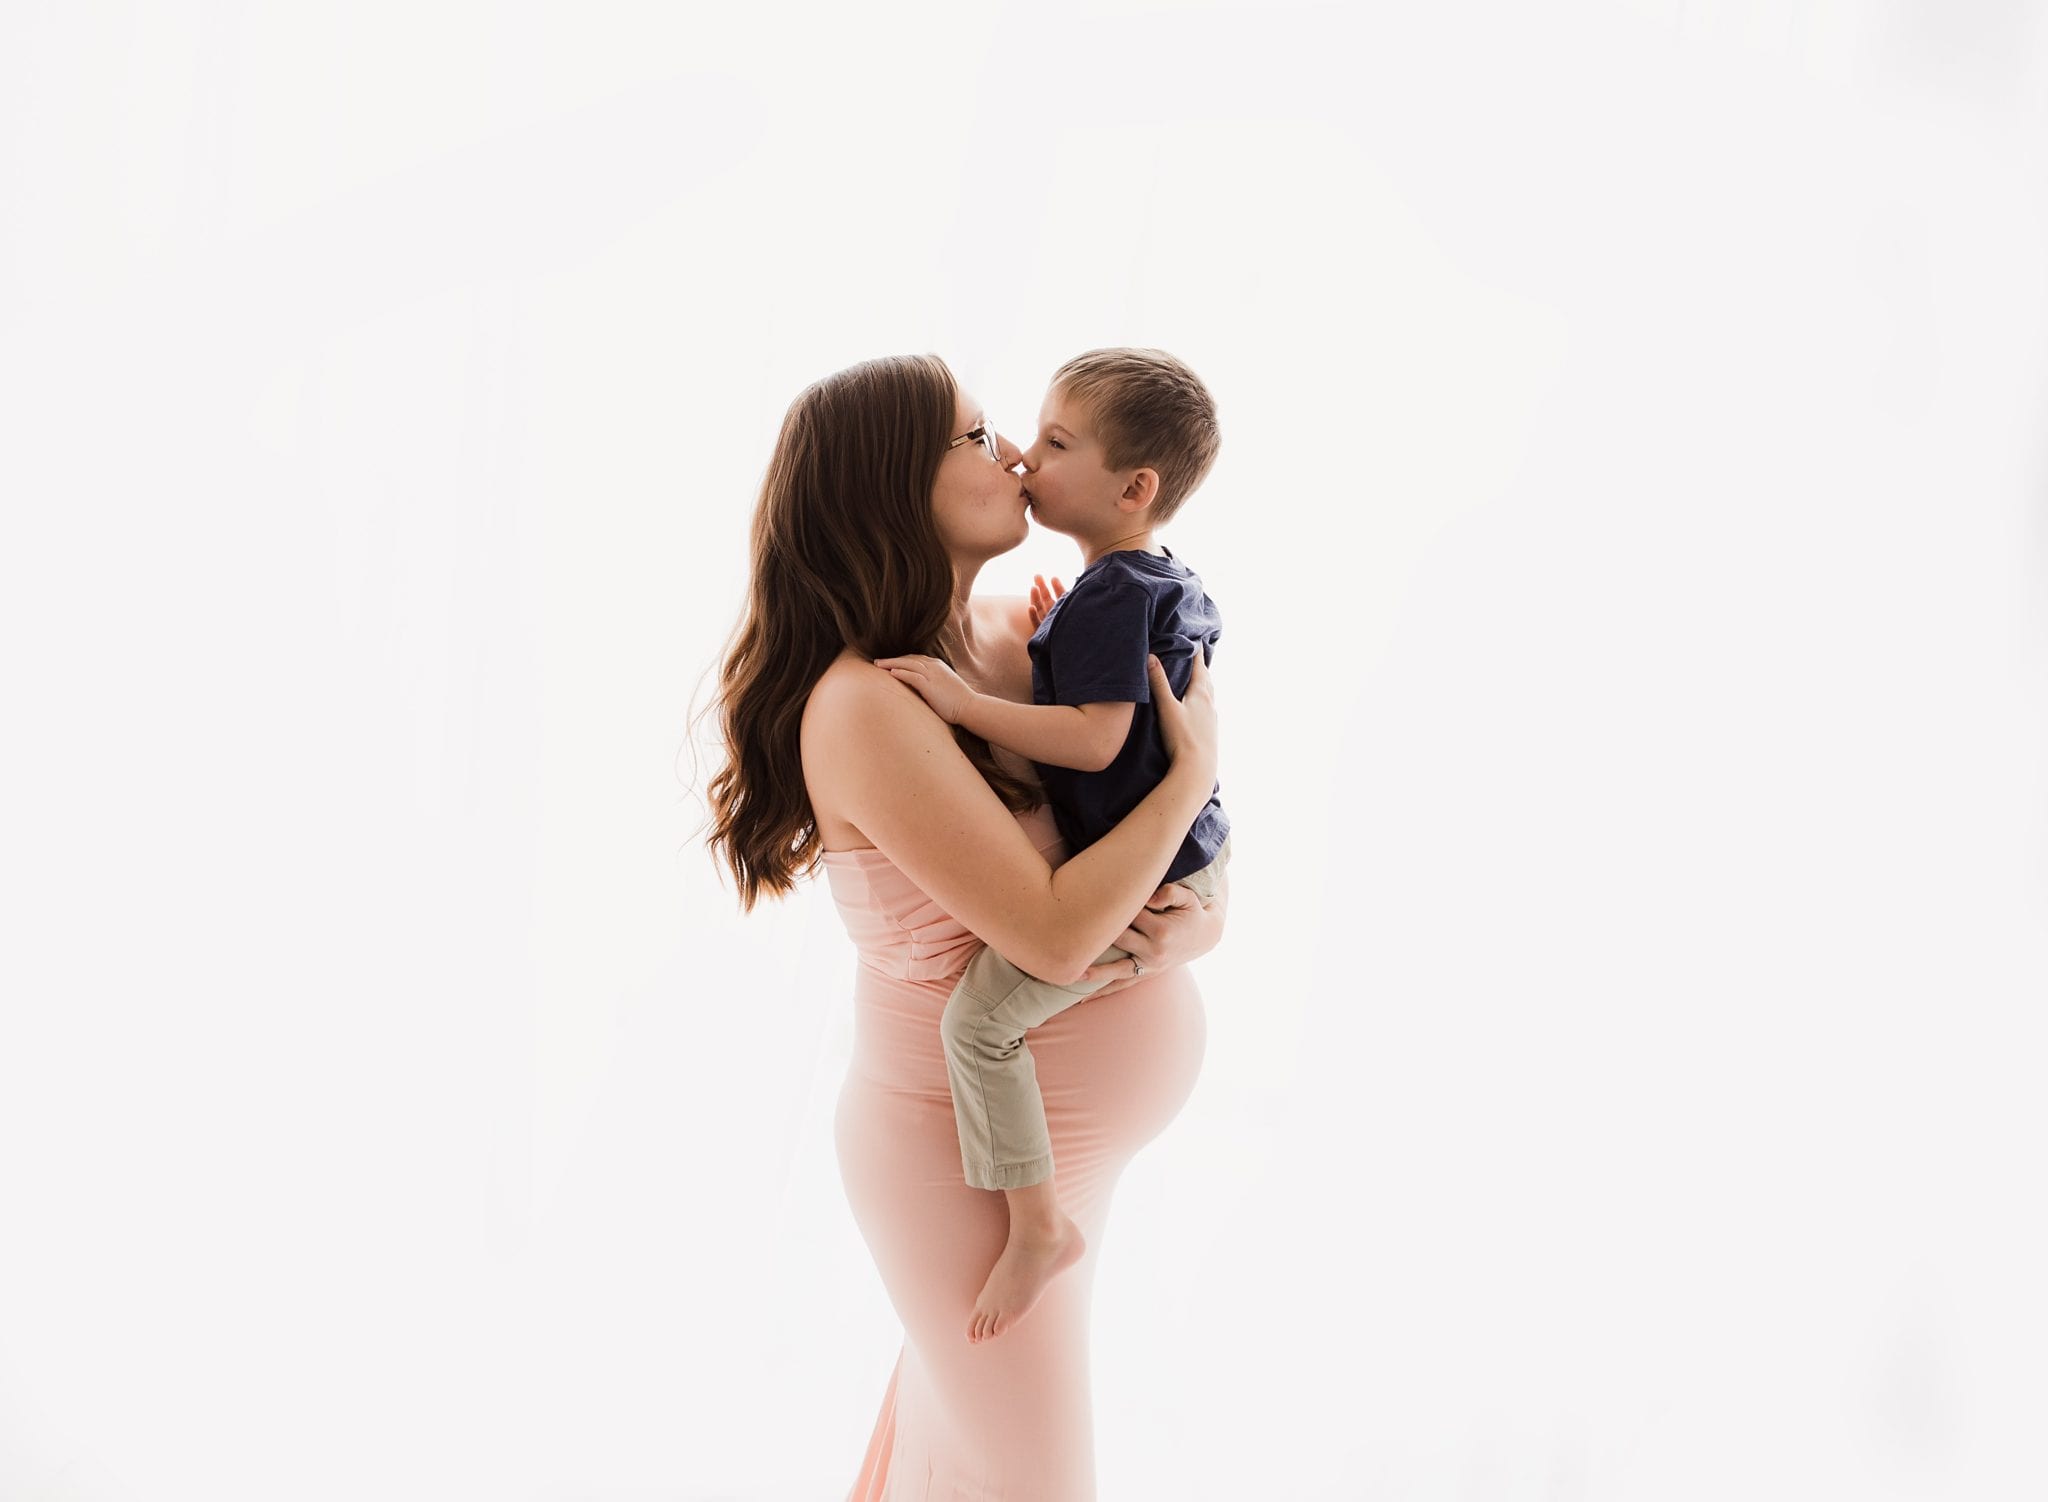 Pregnancy pictures | Capturing your growing baby and bellycute family